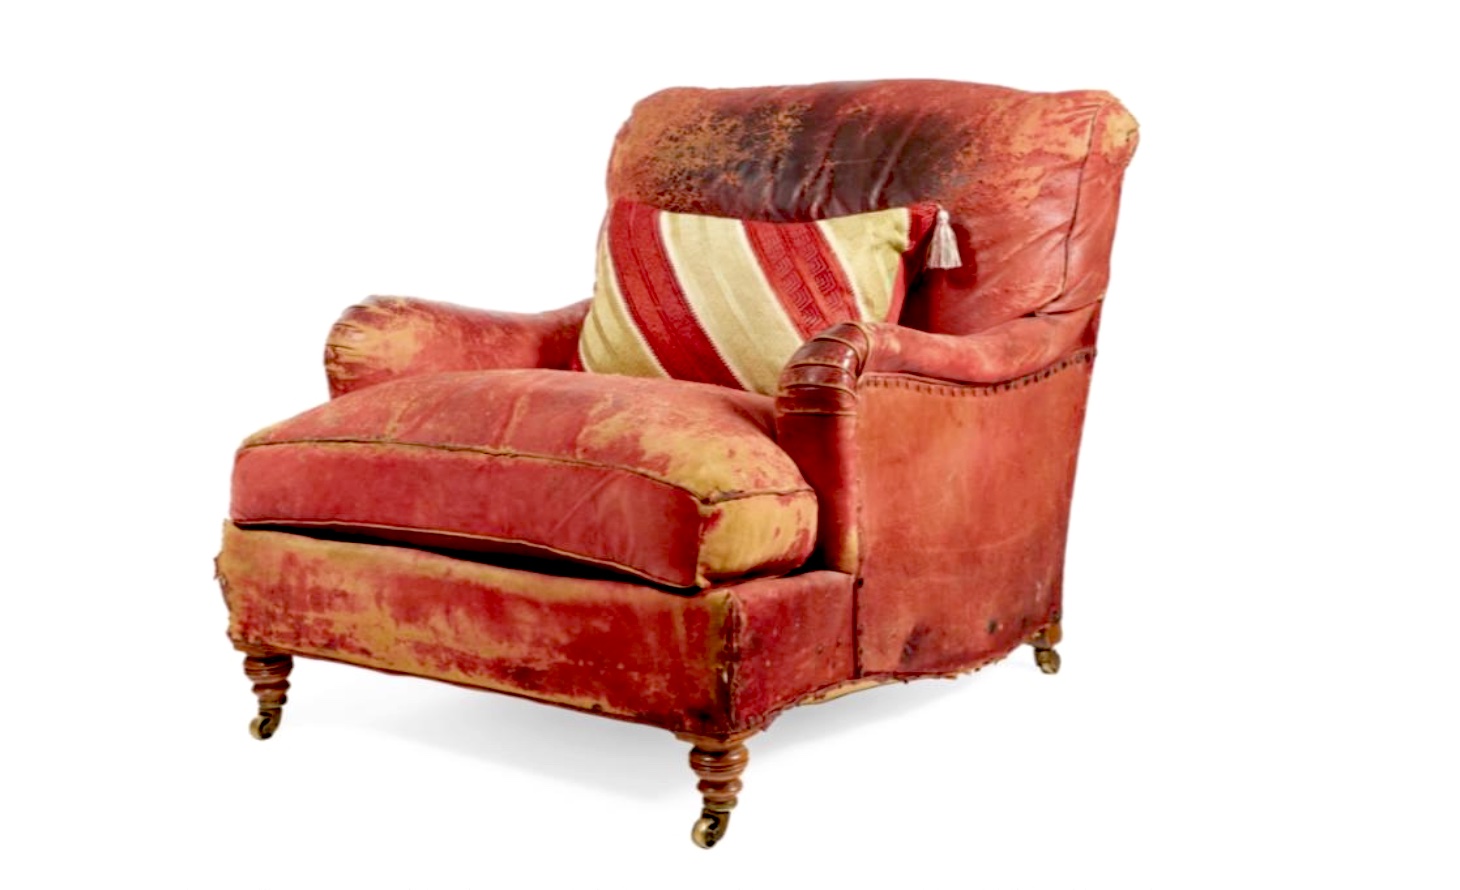 A late 19th-century red leather armchair by Howard & Son